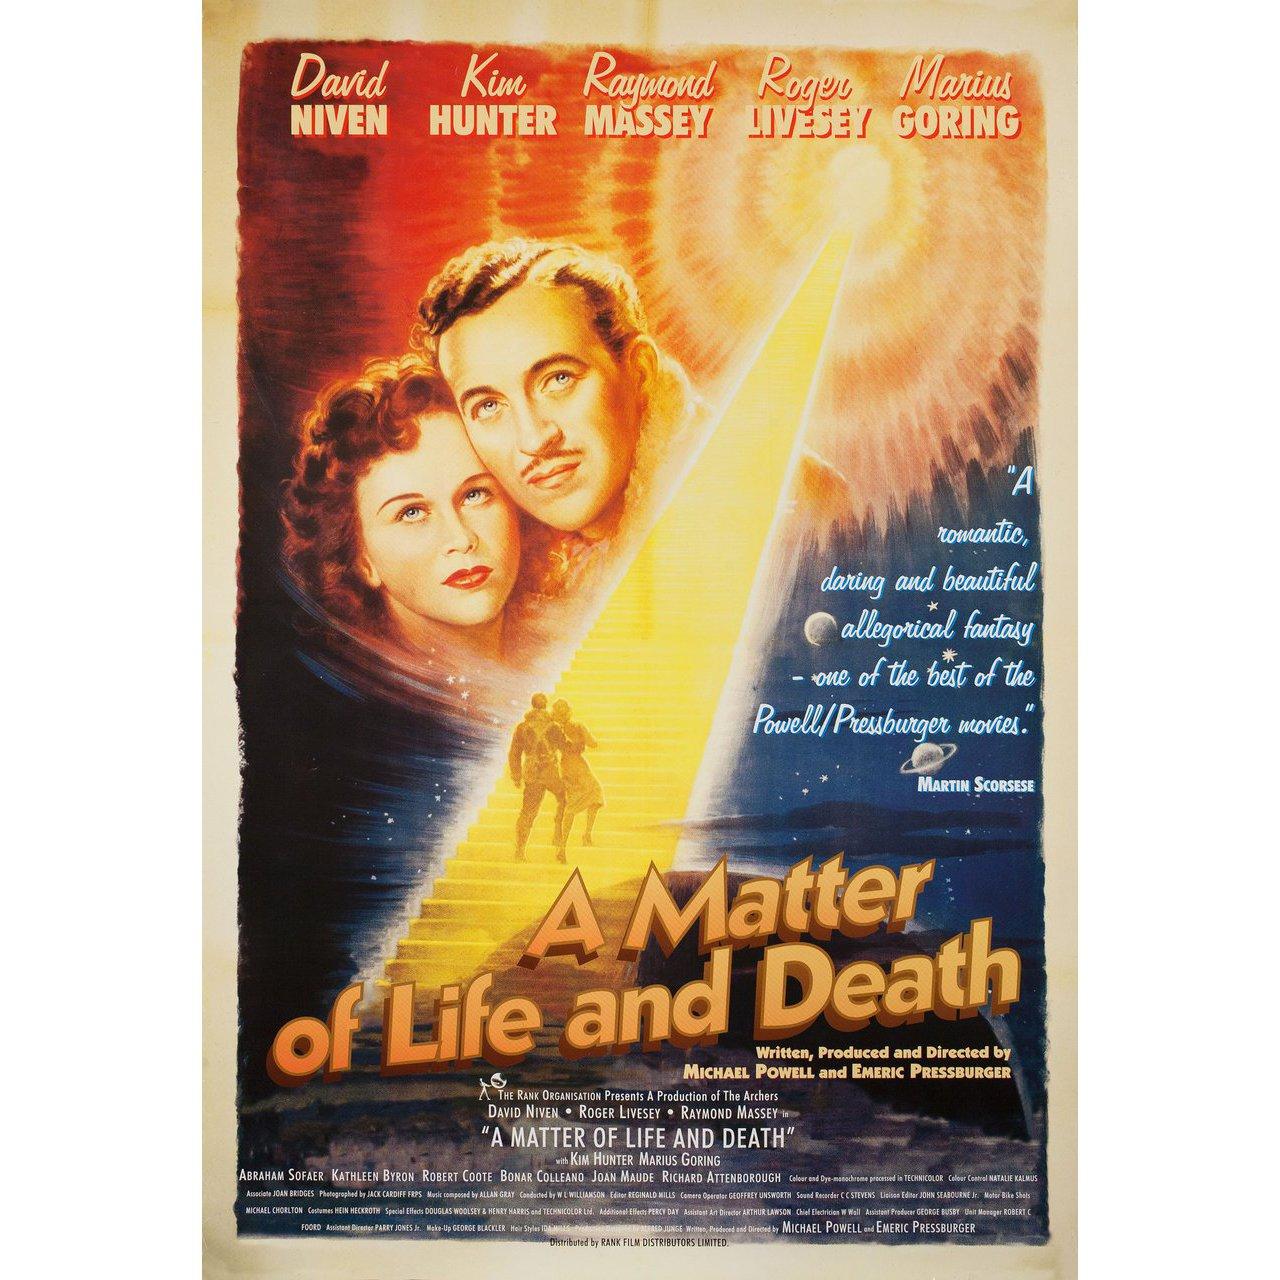 Original 1995 re-release British one sheet poster by Anselmo Ballester for the 1946 film A Matter of Life and Death (Stairway to Heaven) directed by Michael Powell / Emeric Pressburger with David Niven / Kim Hunter / Robert Coote / Kathleen Byron.